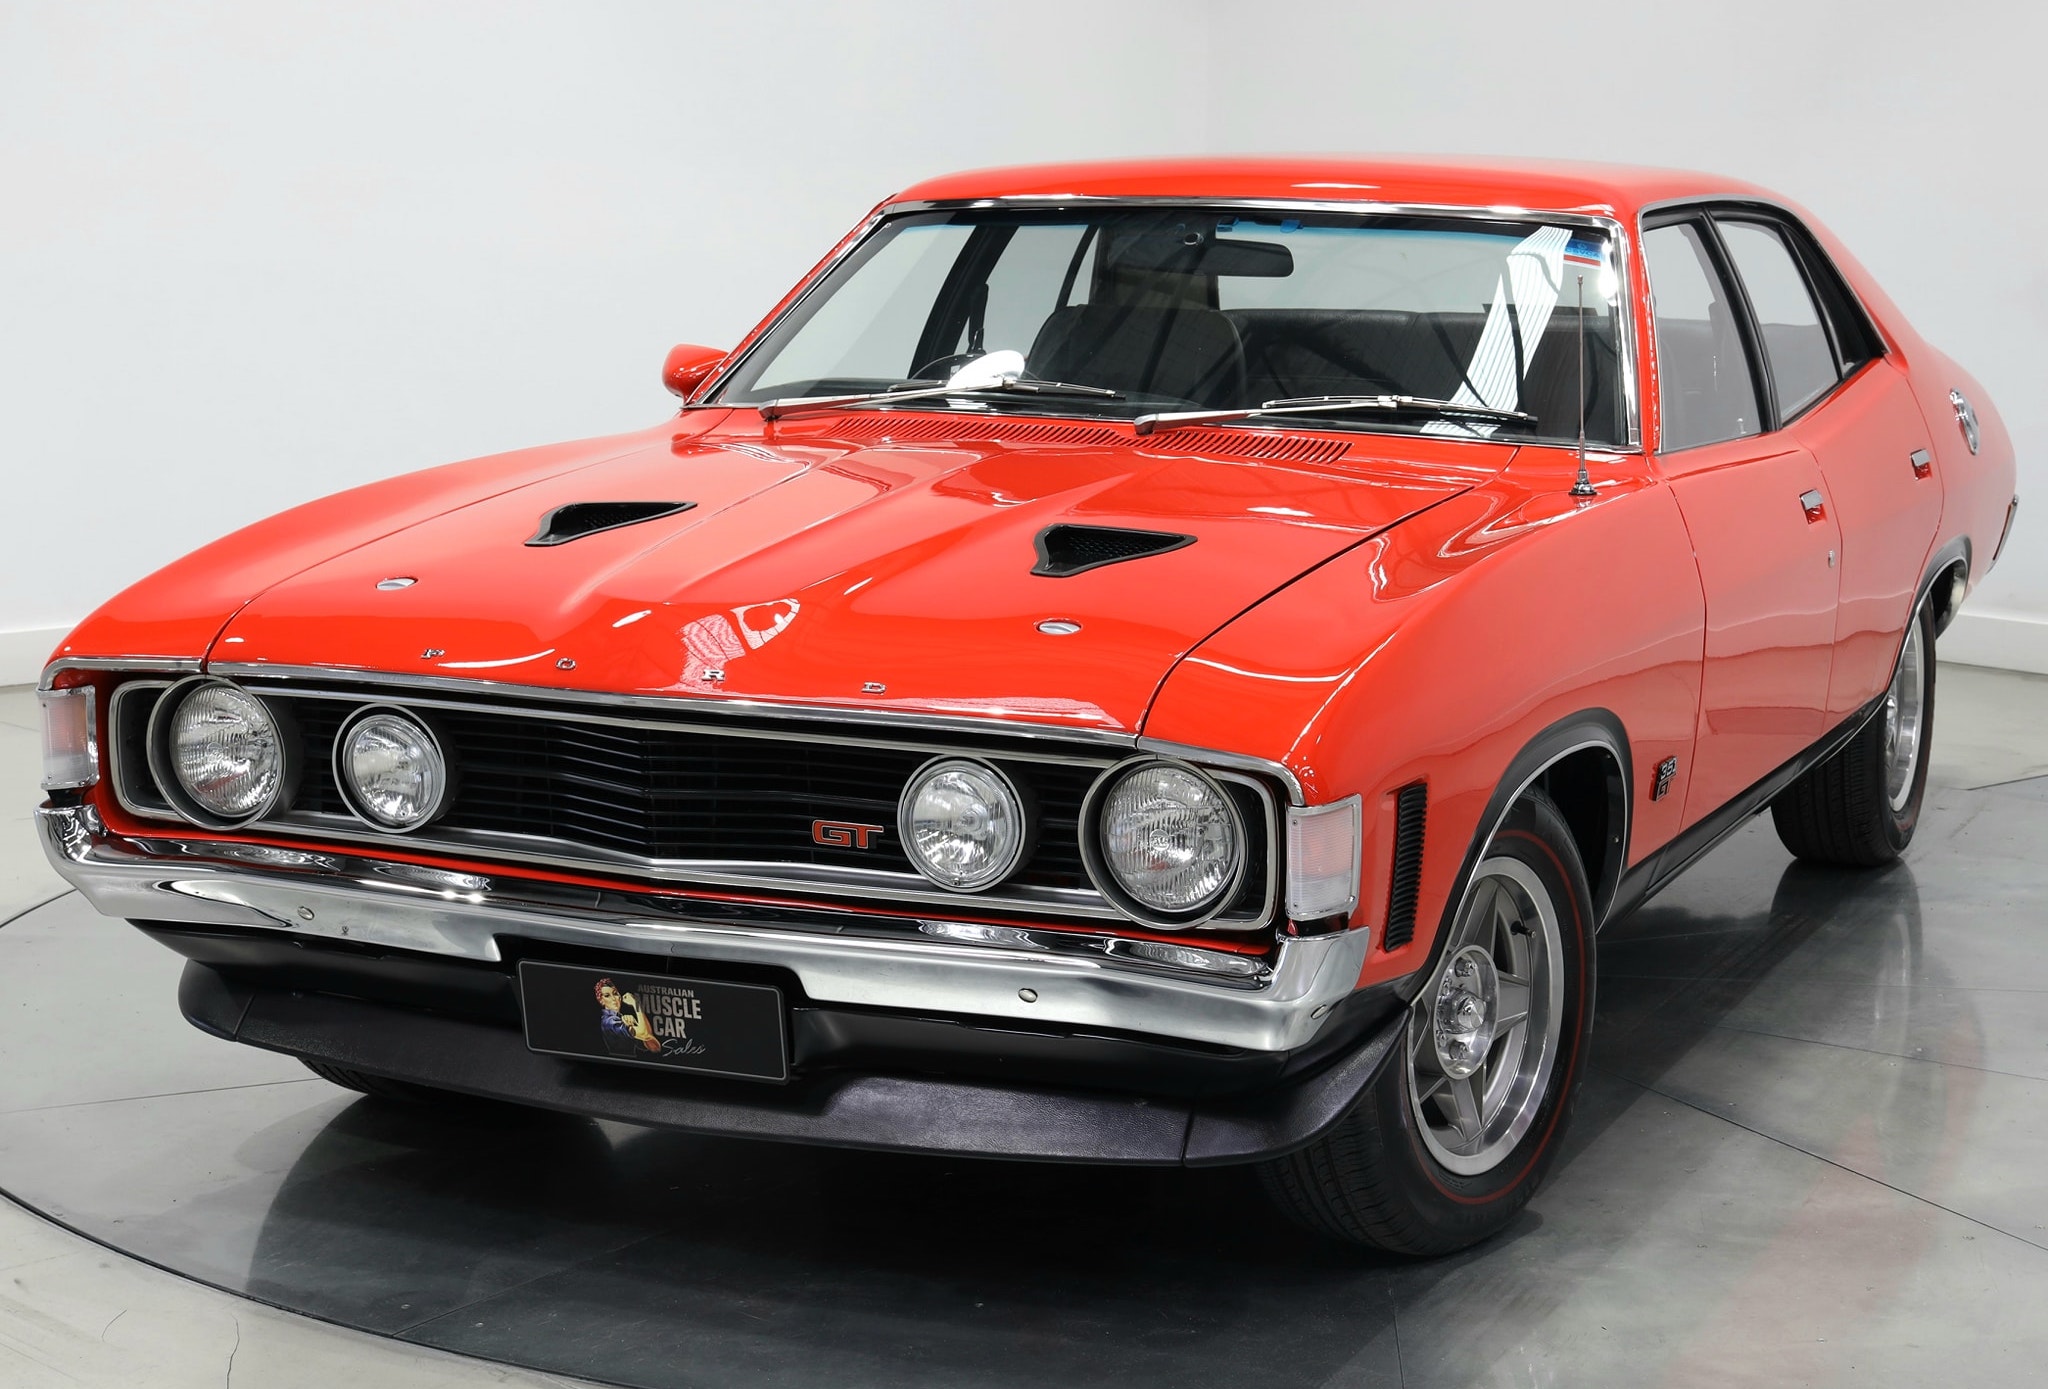 Red Pepper 1973 Ford Falcon XA GT listed for sale with AMCS